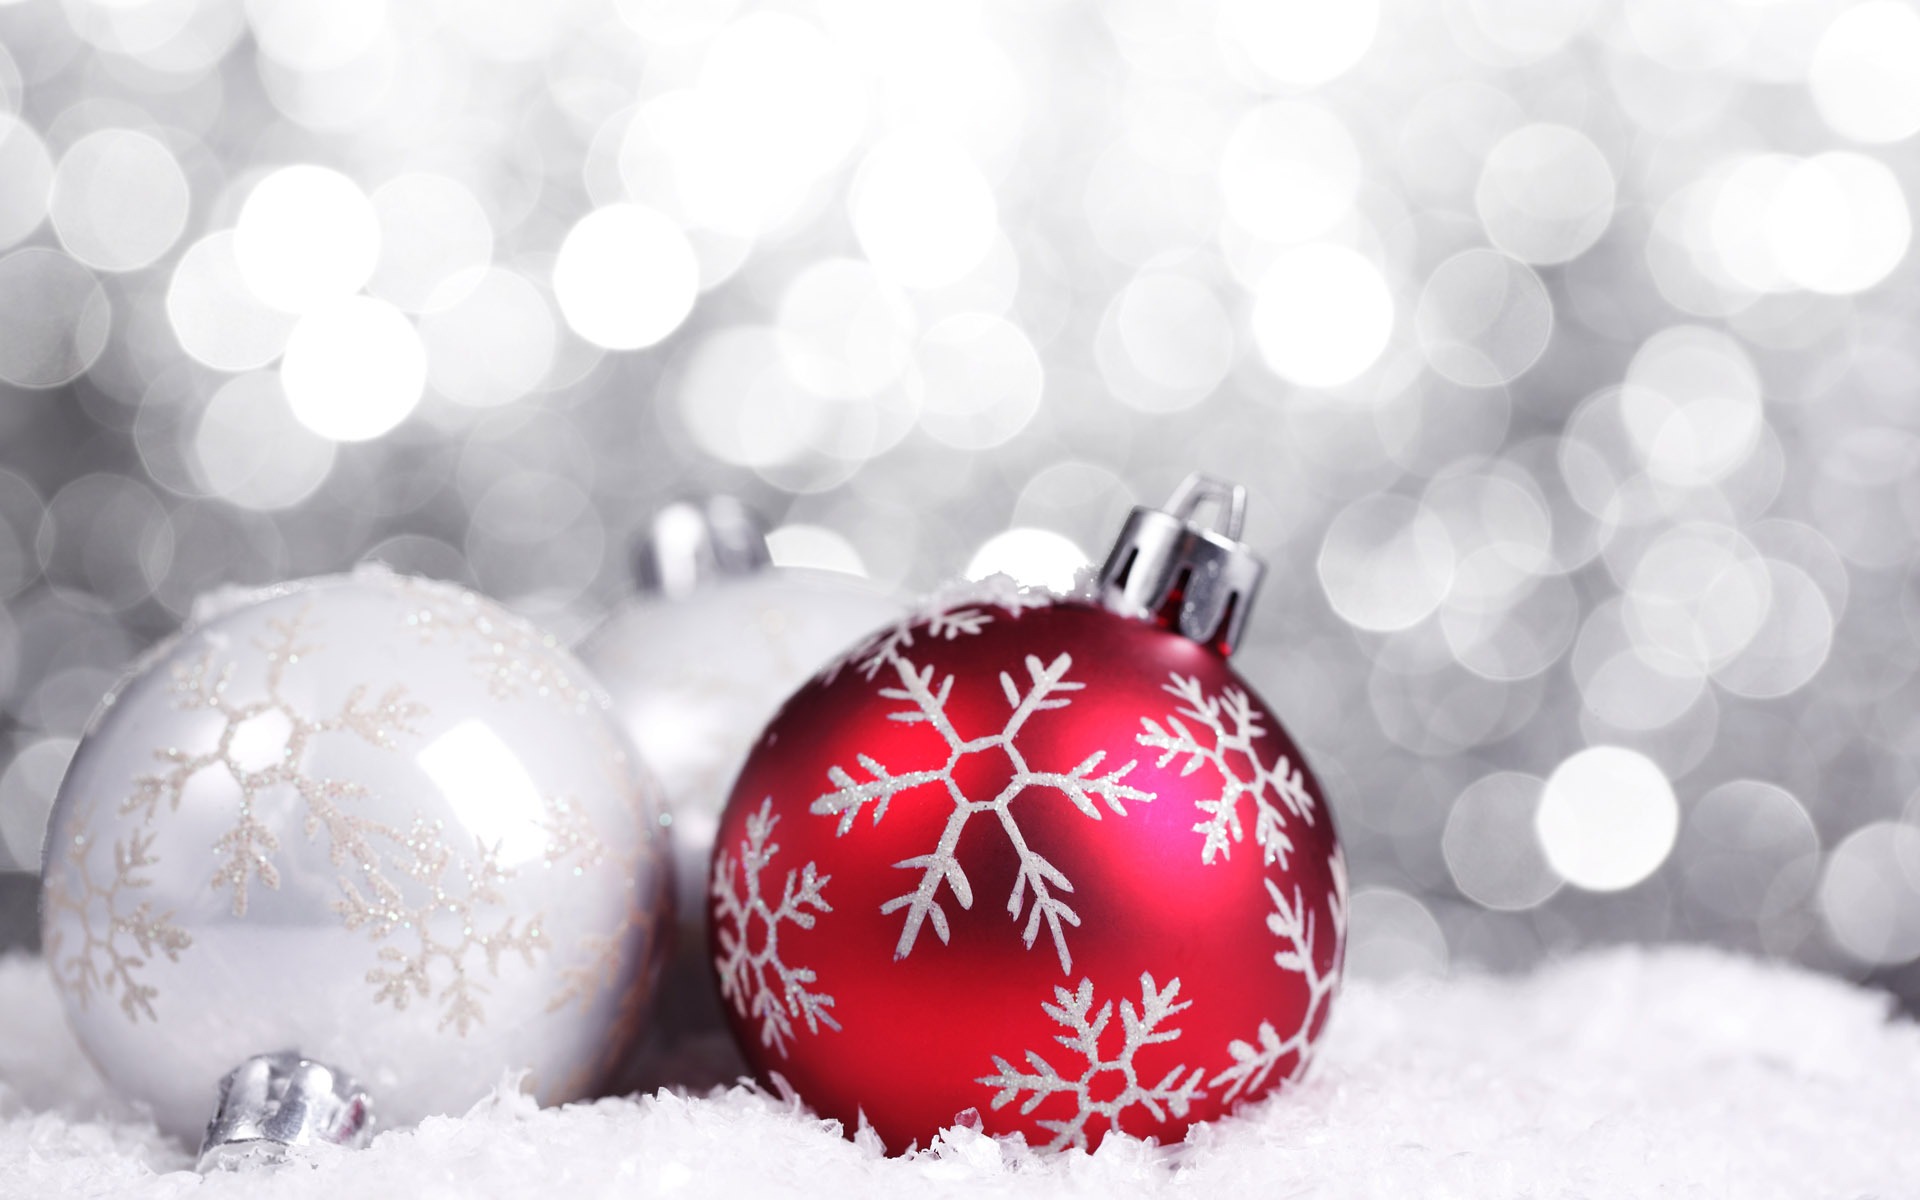 Hd Wallpapers Christmas Balls Wallpapers - Red Christmas Ornament Background - HD Wallpaper 